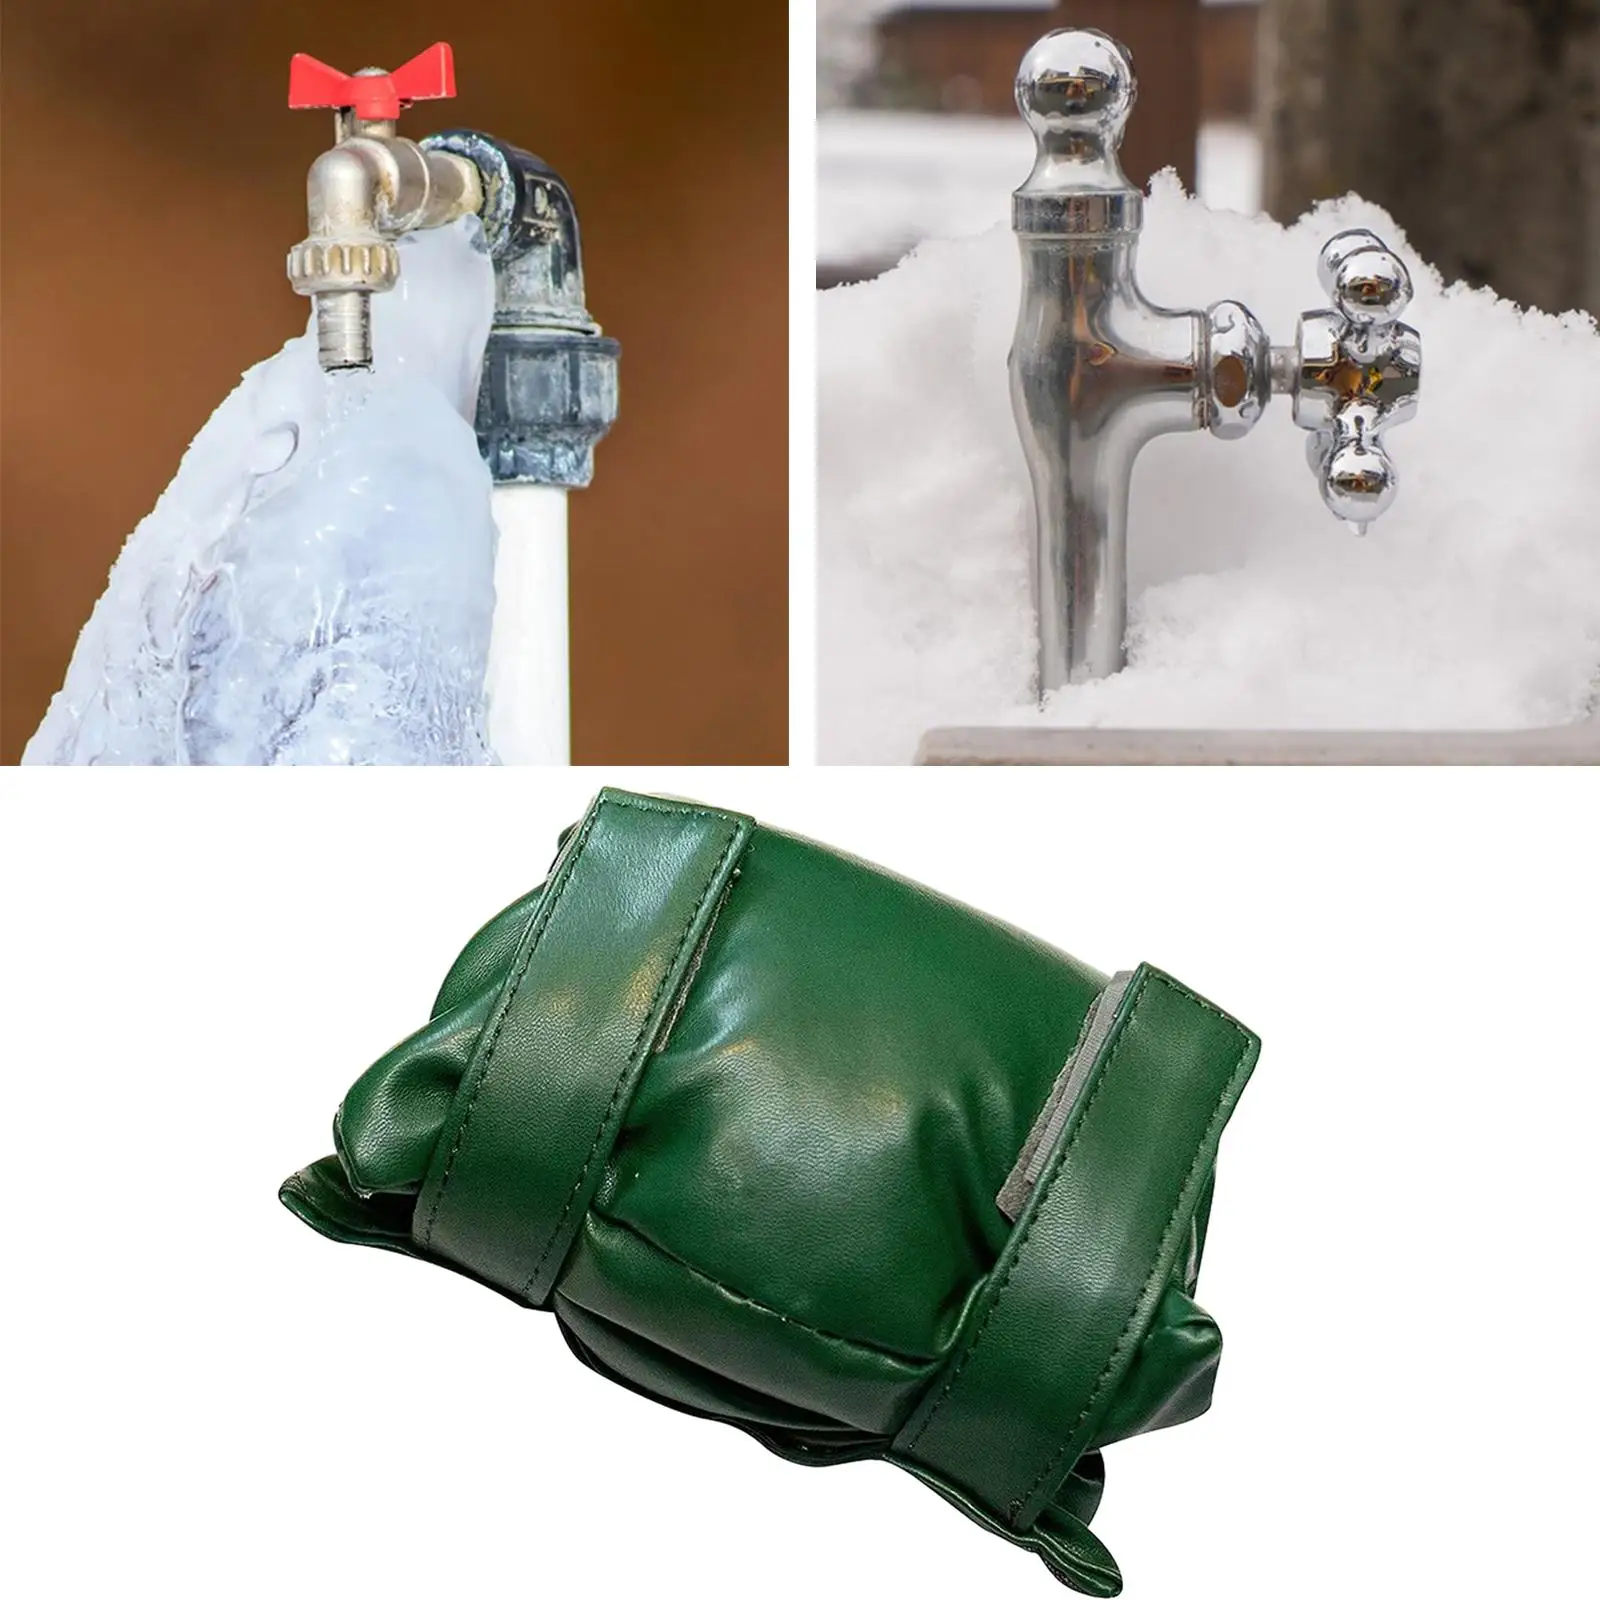 Outdoor Faucet Covers Winter Faucet Covers for Outdoor Garden Cold Weather